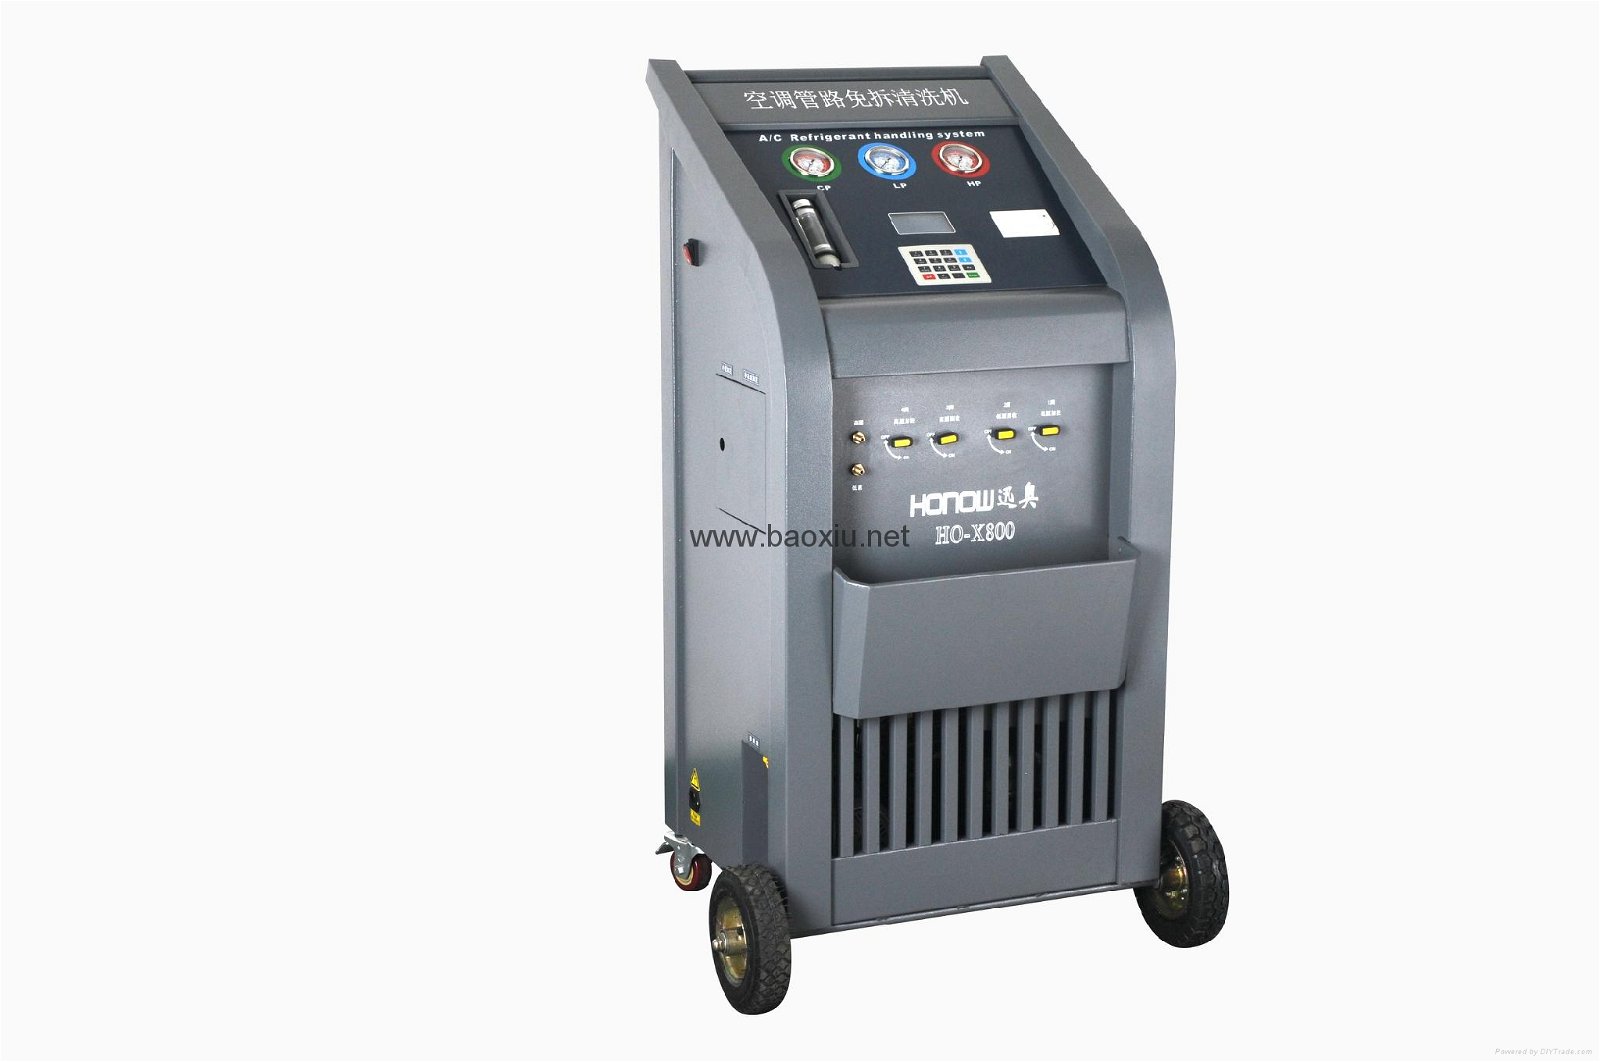 Hight quality CAR A/C System Flushing & Cleaning Machine